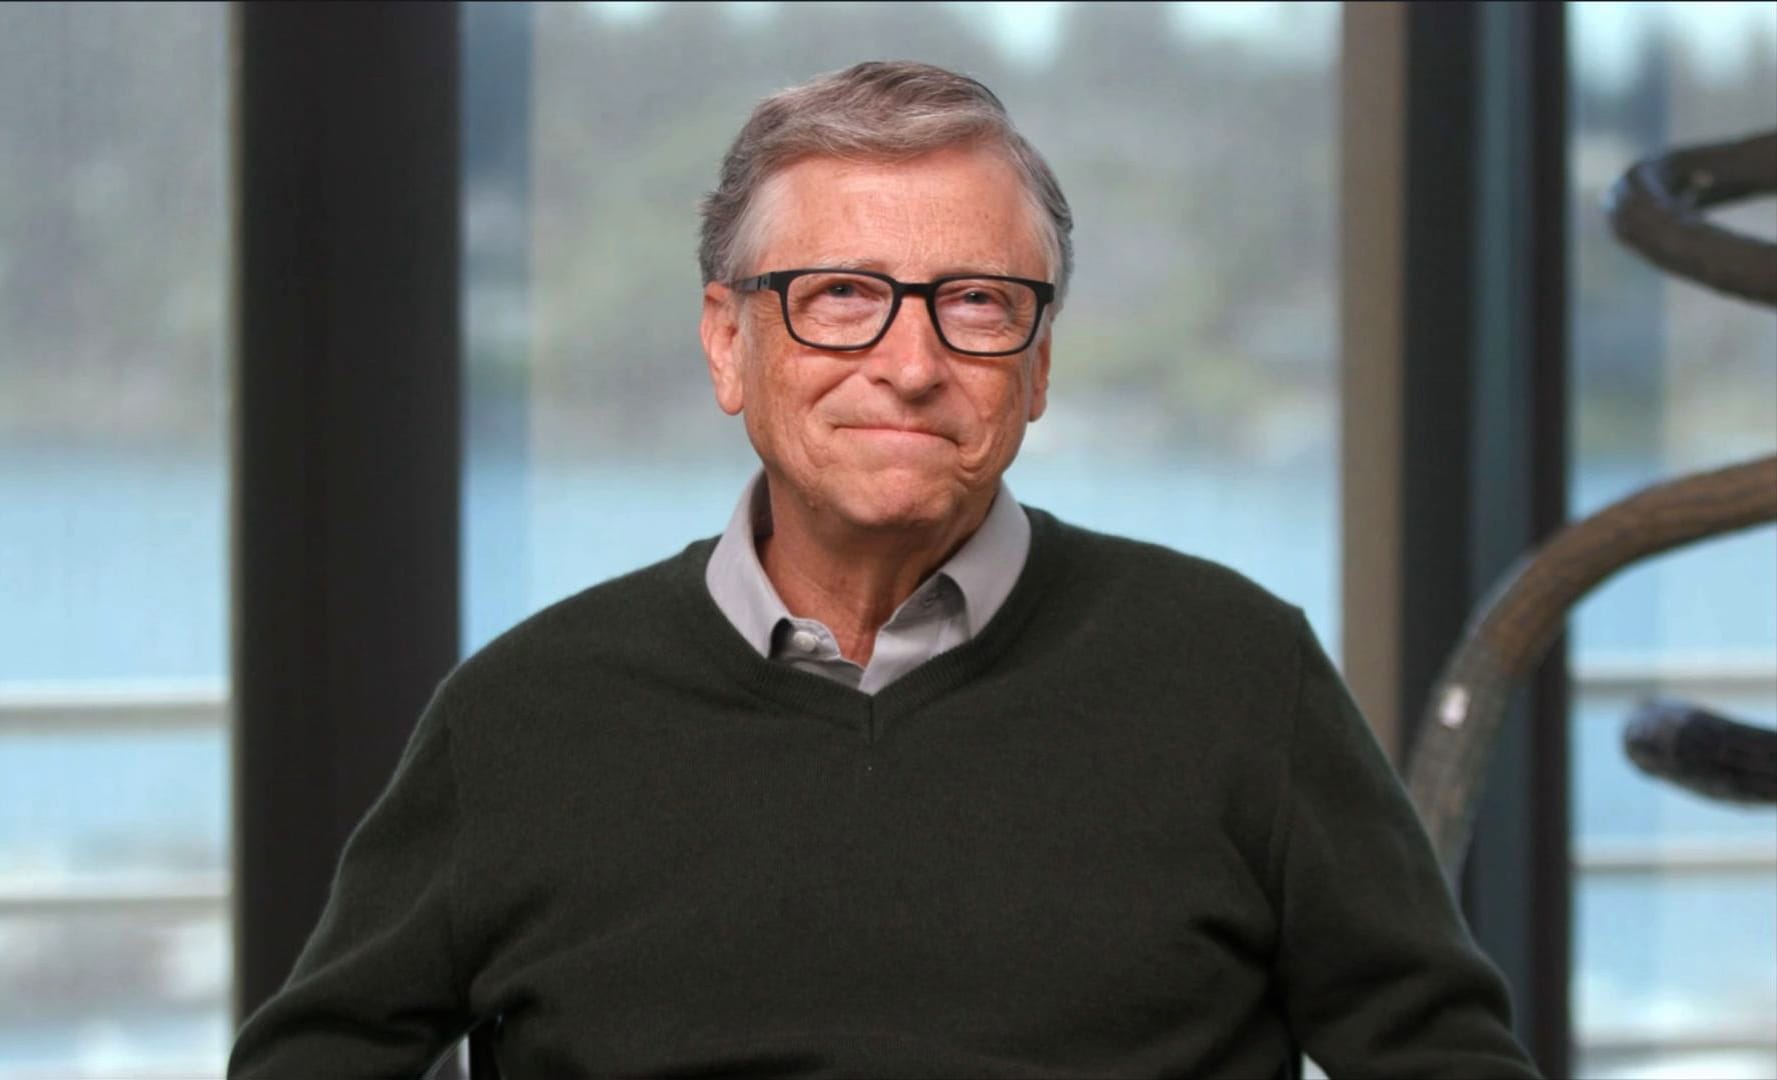 Bill Gates is said to have been pressured to resign